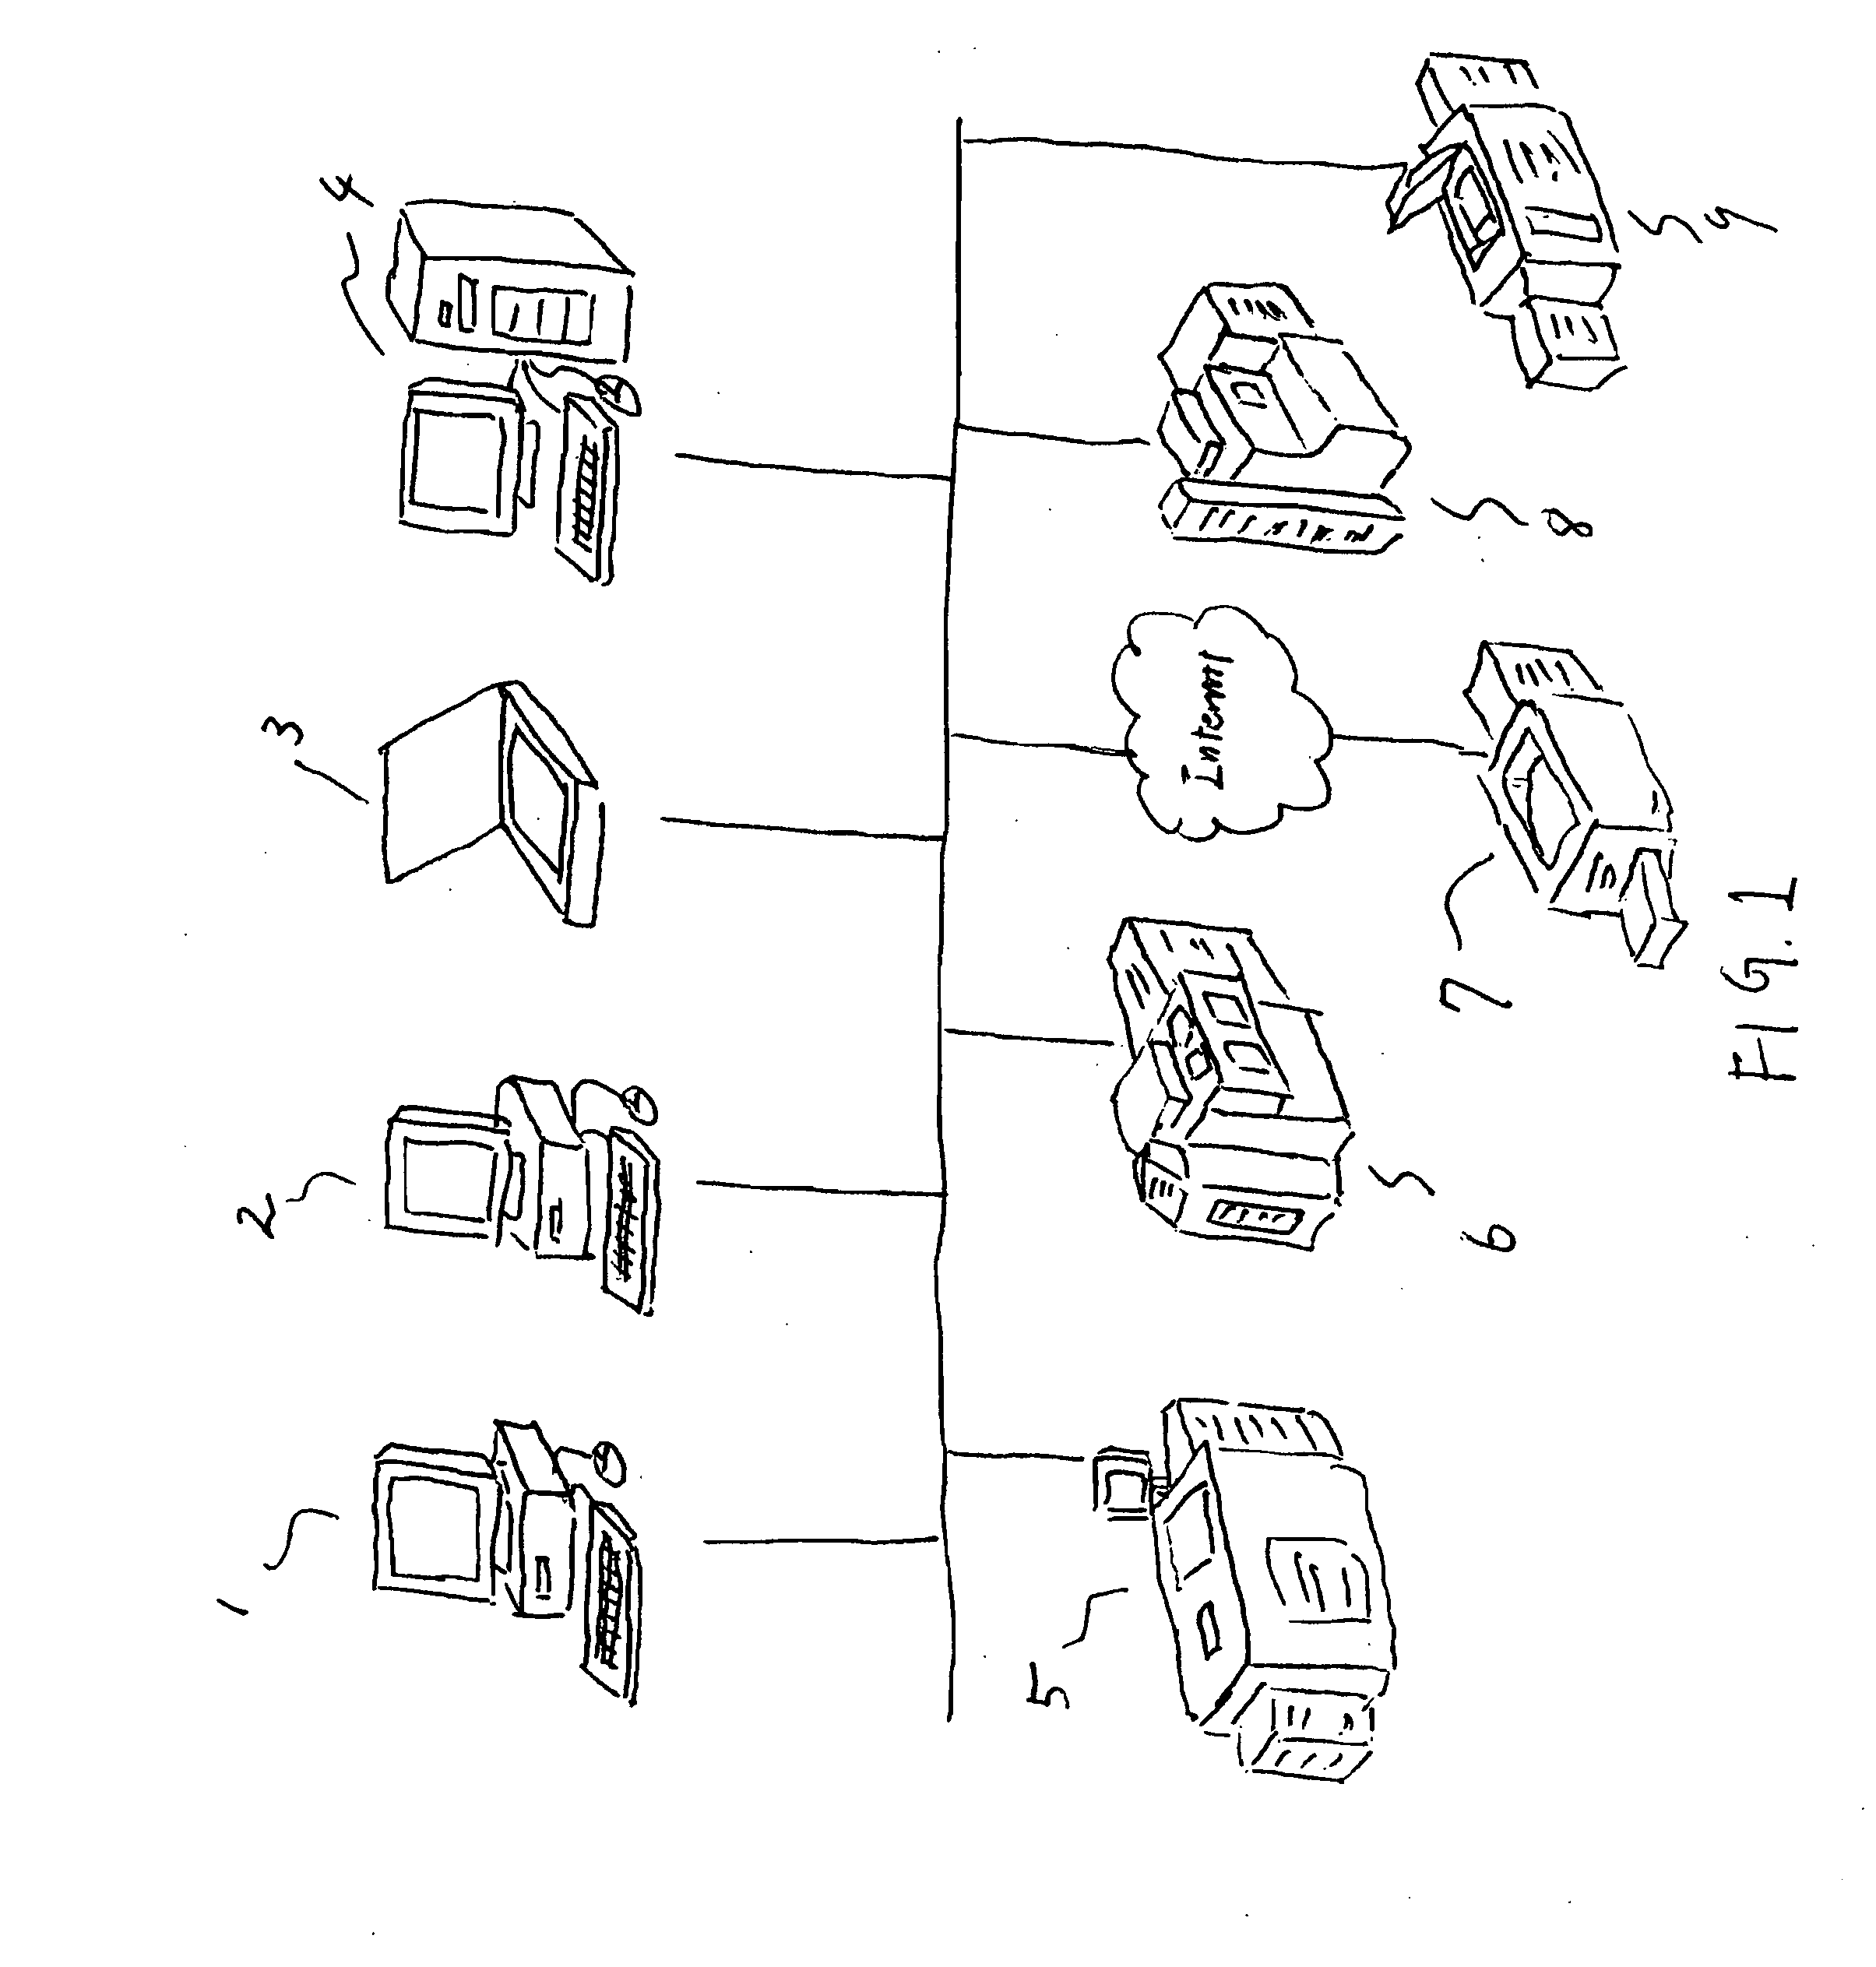 Print job management method and apparatus with grouping function